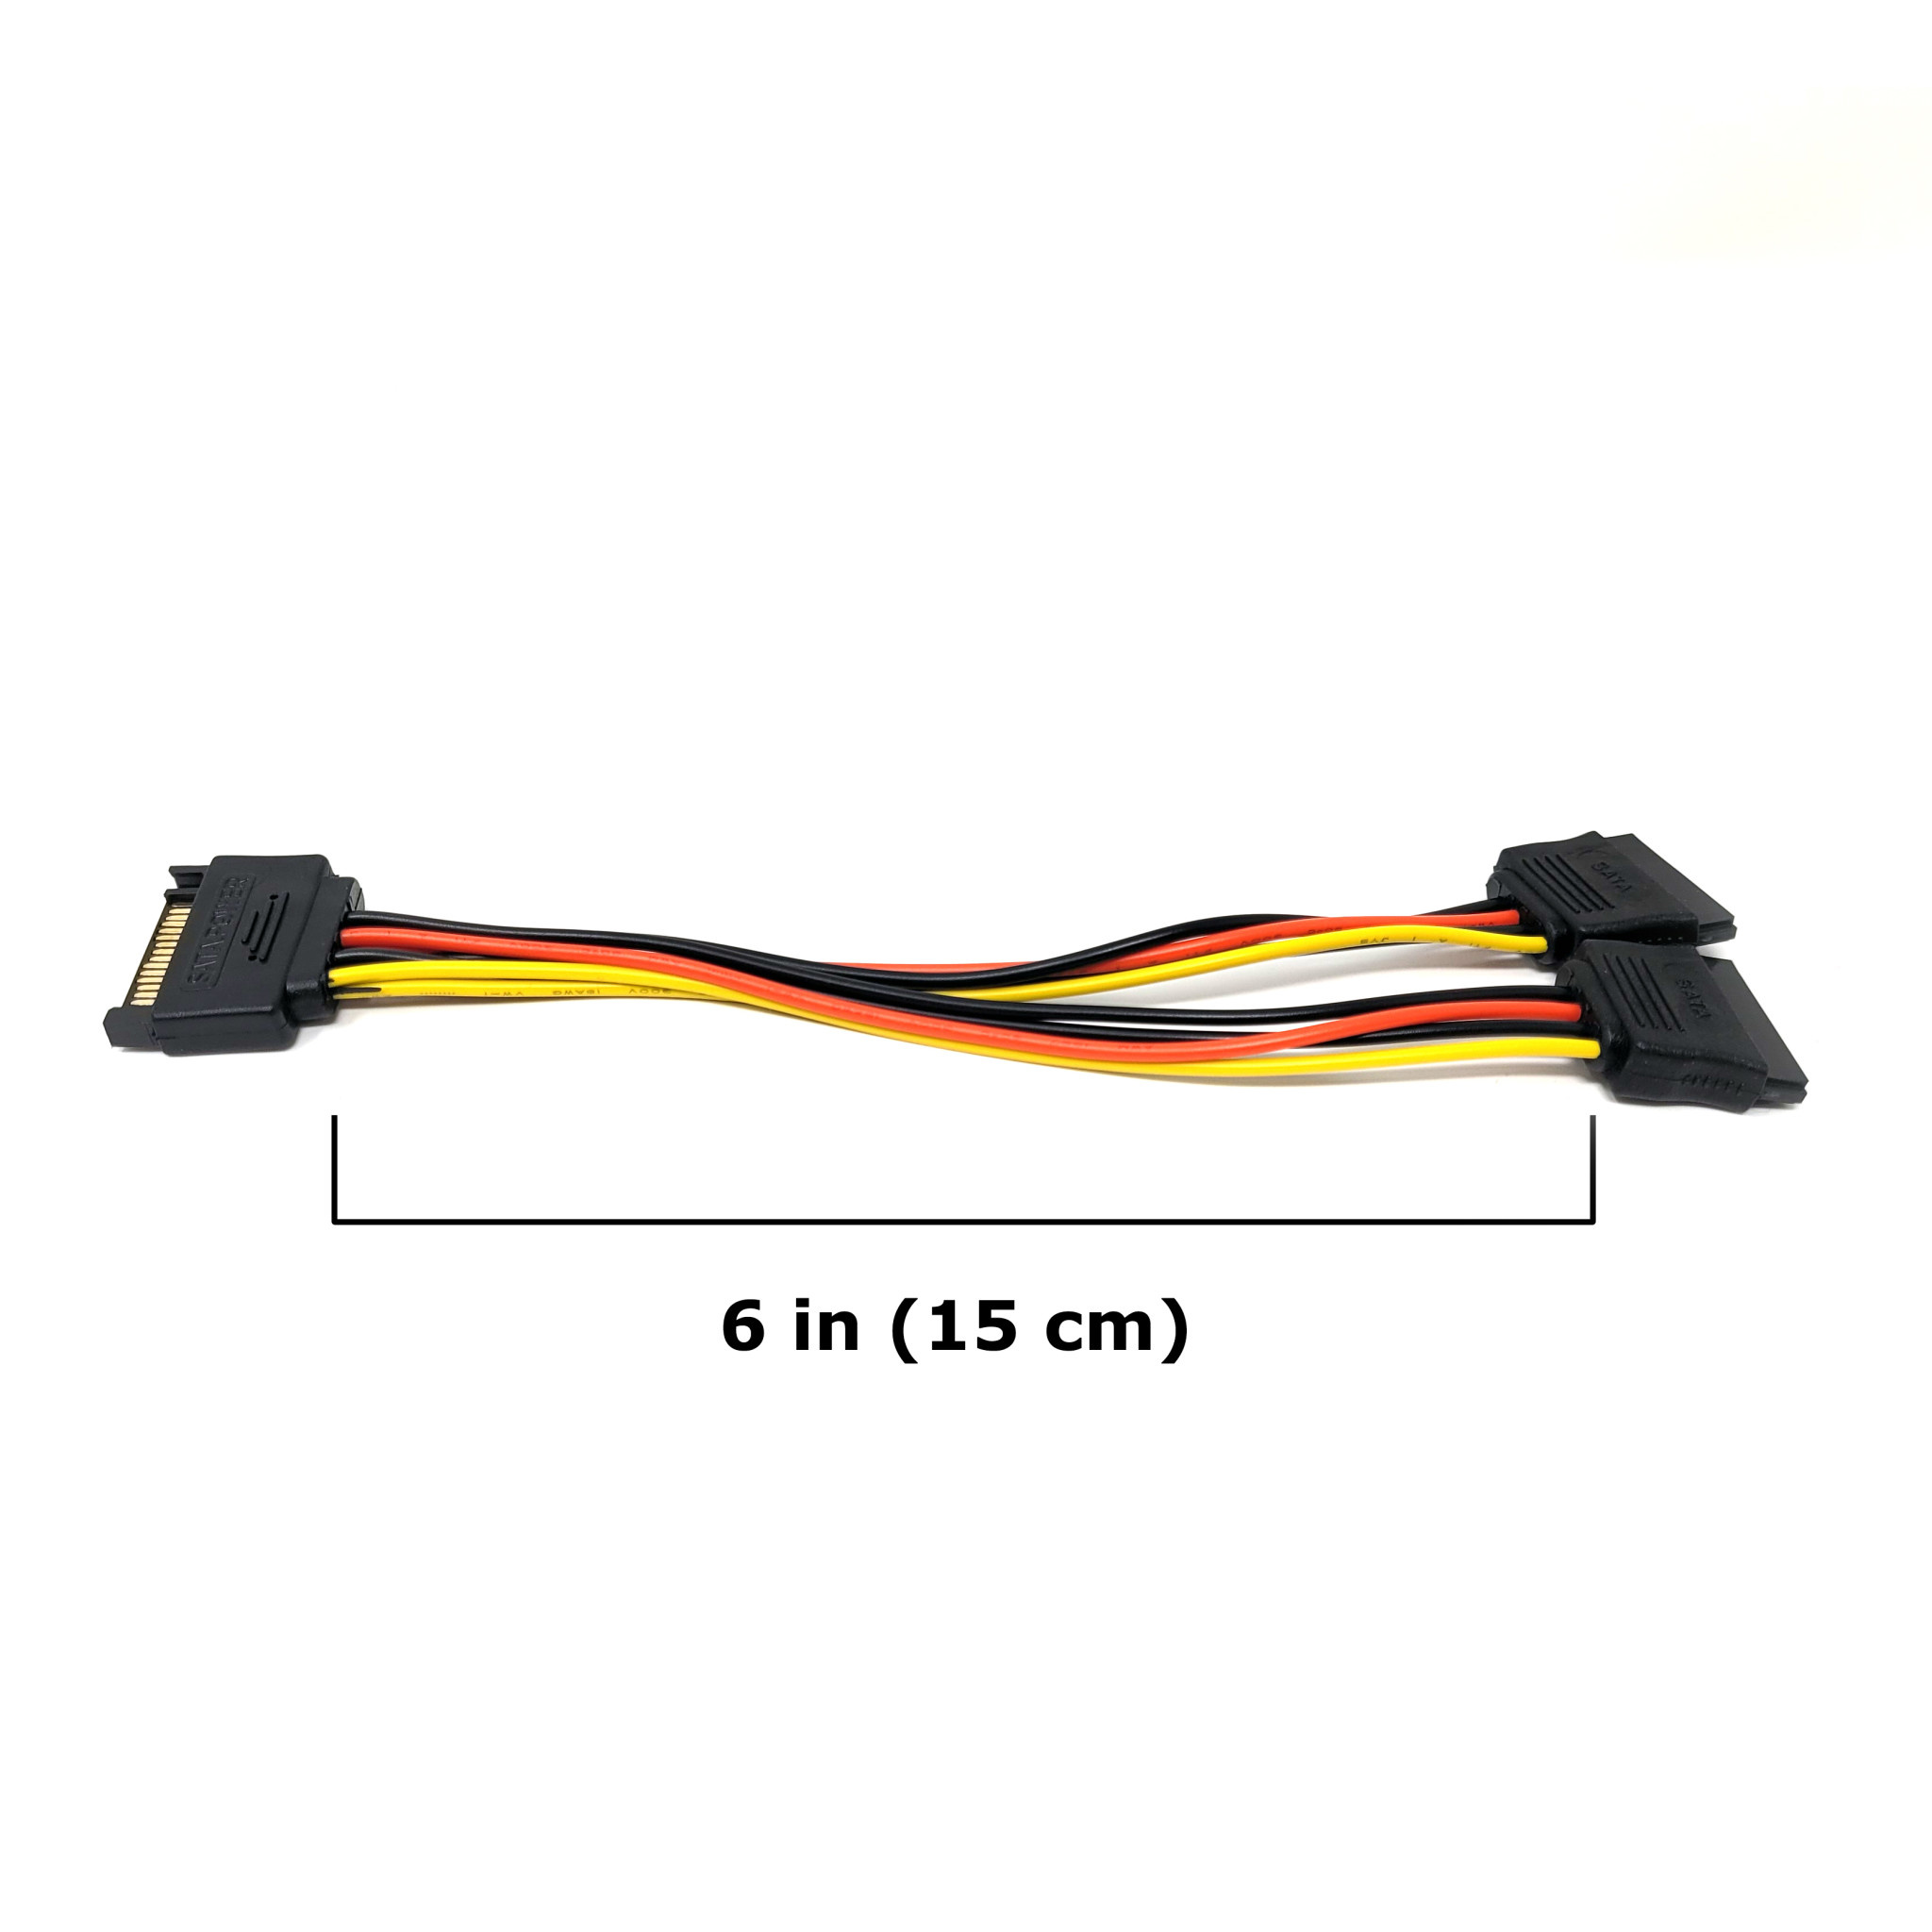 Rantecks SATA Cable and SATA Power Splitter Cable SSD/SATA III Hard Drive  Connection Cables for SATA SSD HDD CD Driver CD Writer